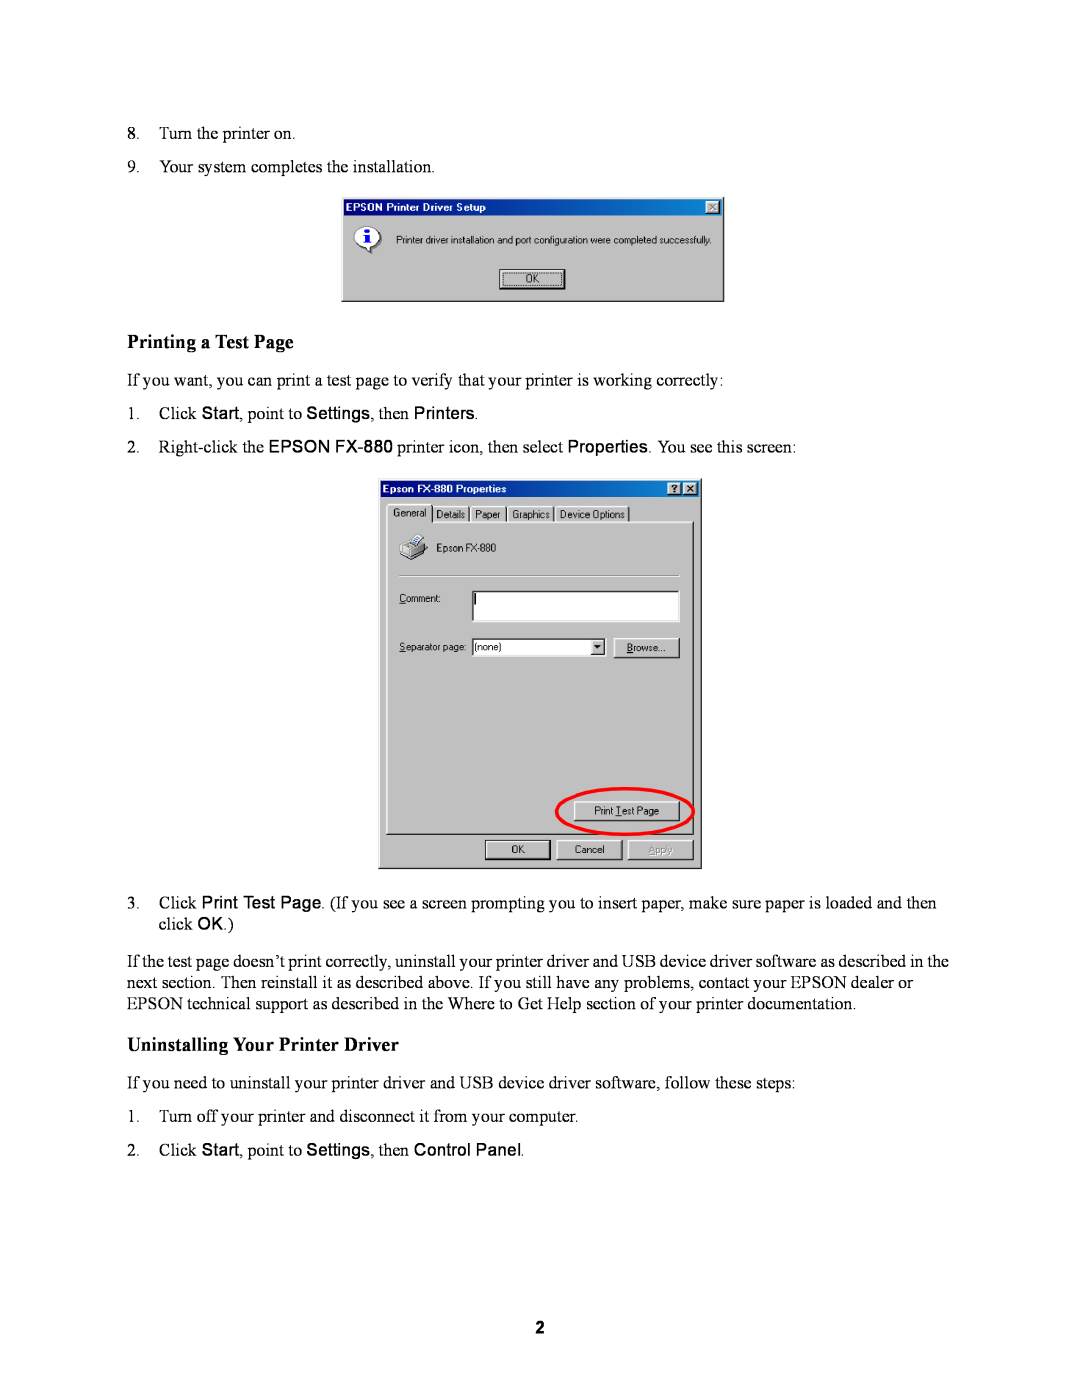 Garmin FX-880 installation instructions Printing a Test Page, Uninstalling Your Printer Driver 